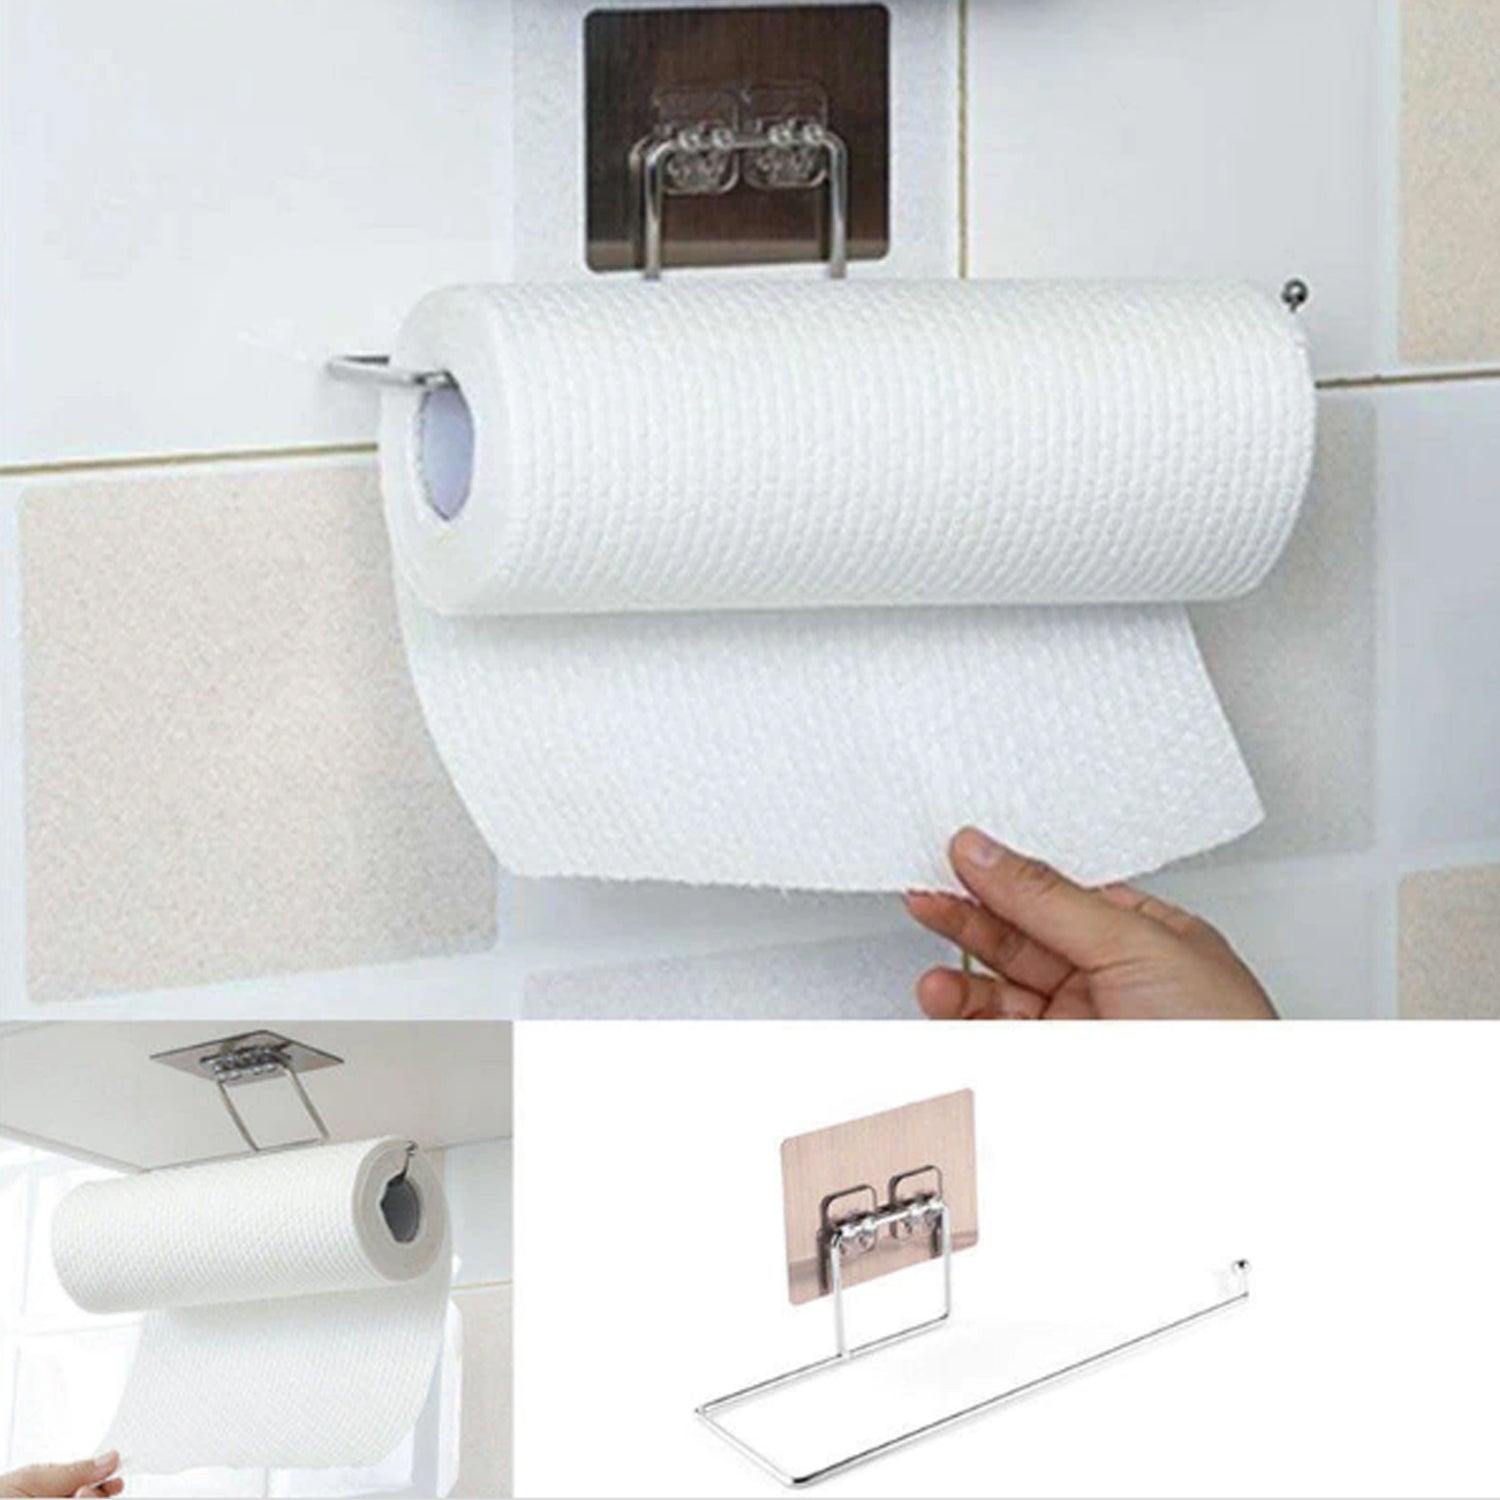 9025 2 Pc Bath Tissue Holder used in all kinds of household and official bathroom purposes by all types of people for holding tissue in bathrooms. DeoDap